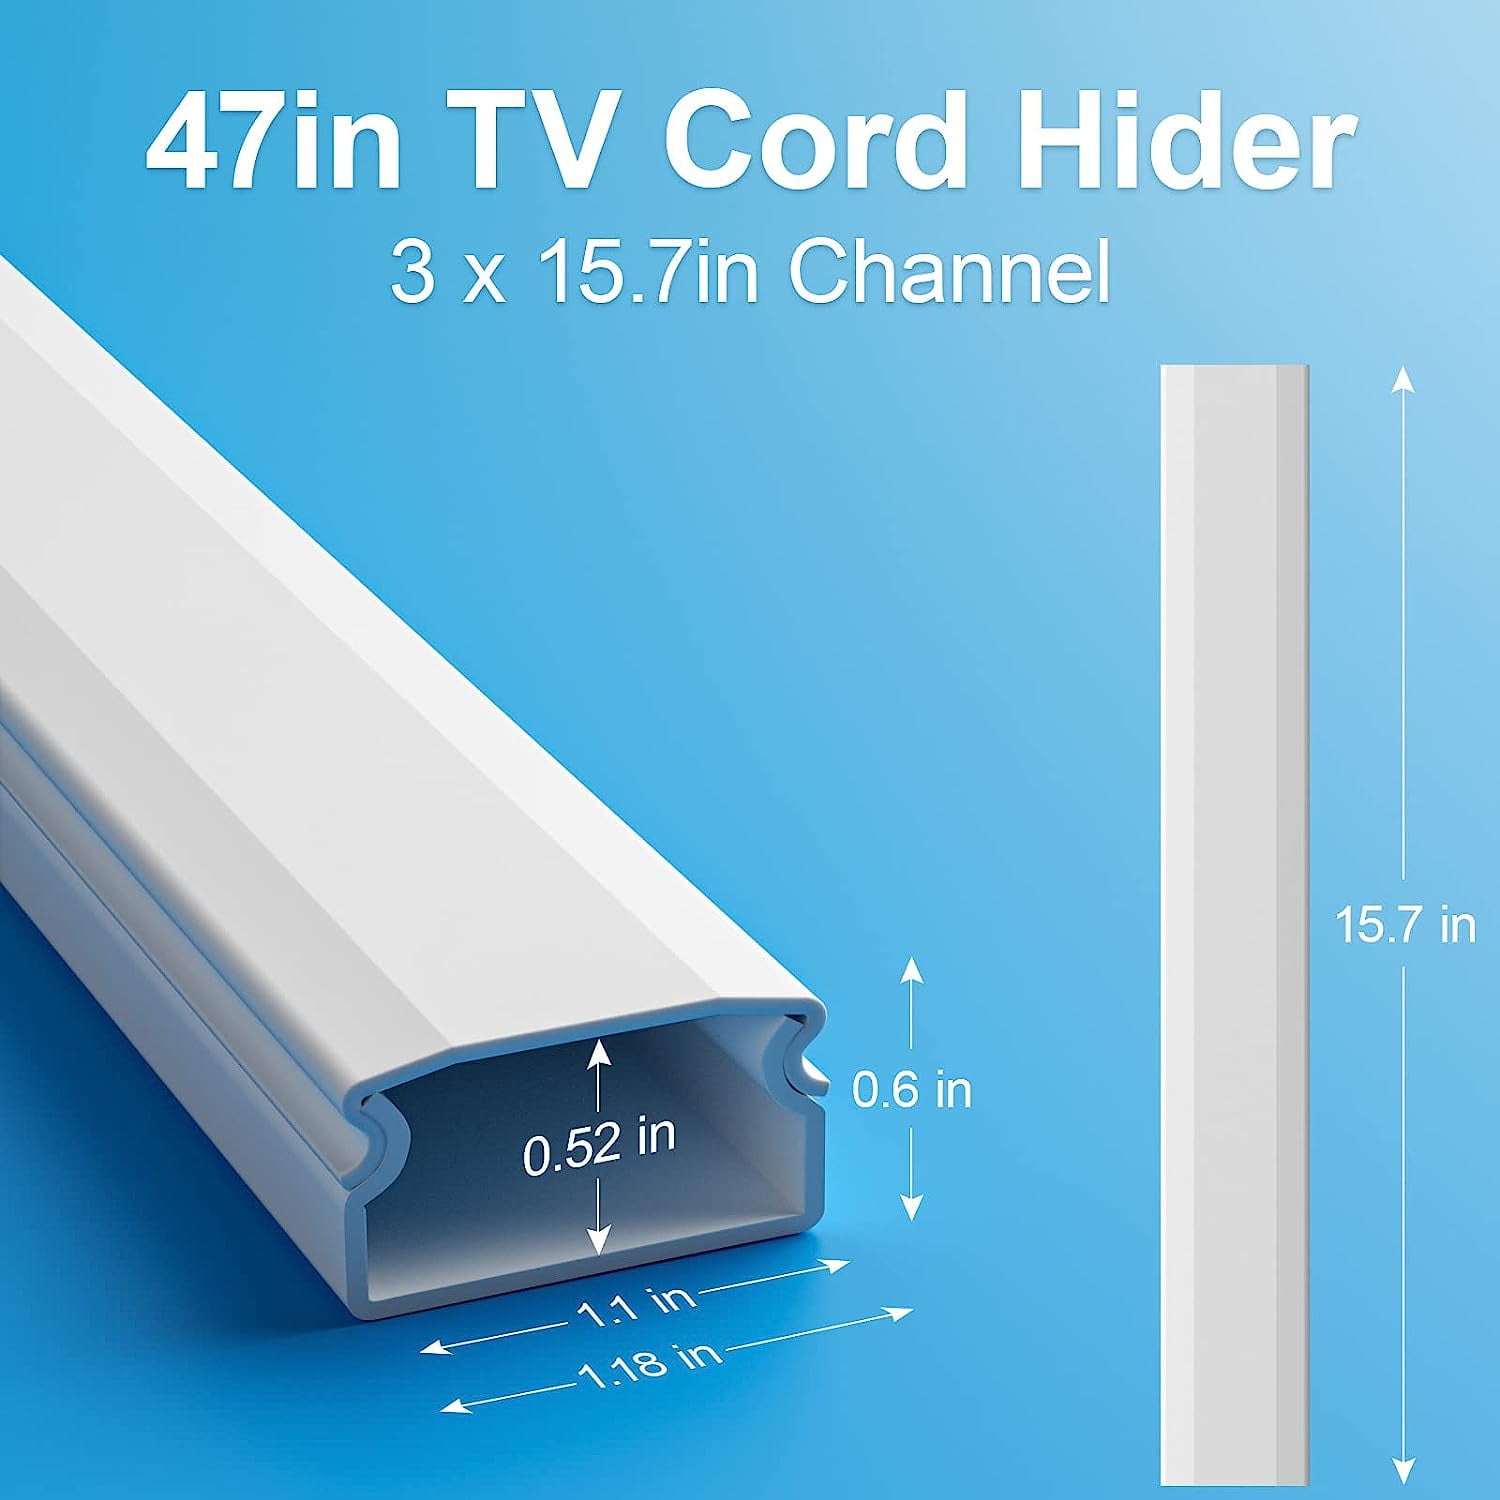 Cord Hider, Delamu Cord Cover, Large Cable Hider, Wire Covers for Cords  Cable Raceway, Wire Hider Cable Cover for Wall Mounted TV, Paintable Cord  Concealer Cable Concealer, 2X L15.7 W1.18 H0.6in 